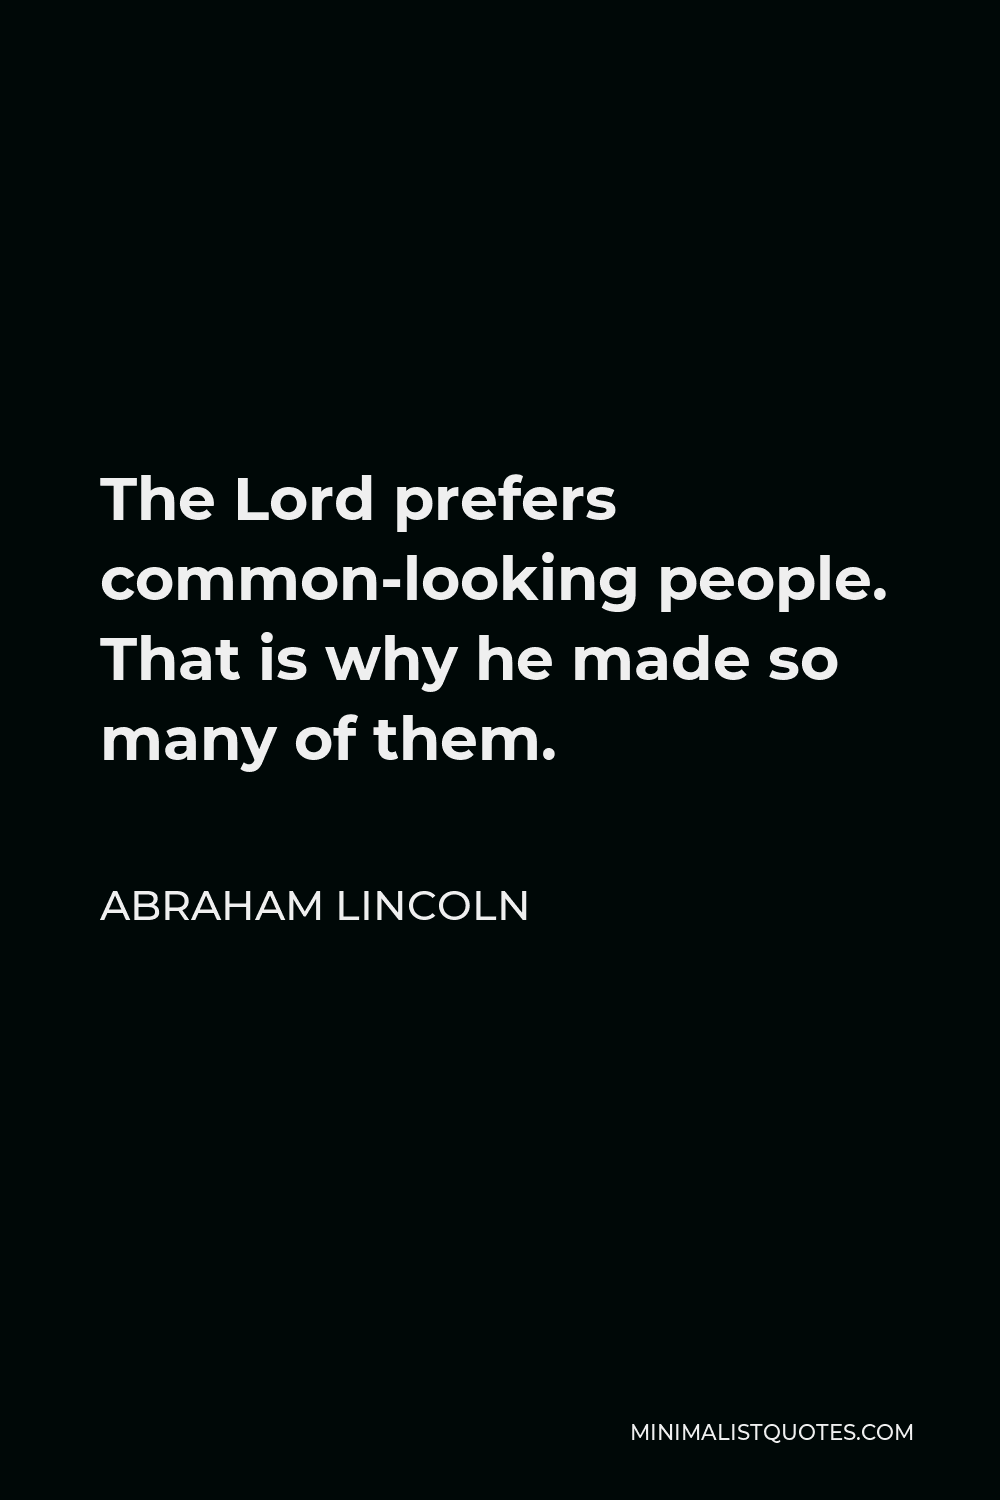 Abraham Lincoln Quote - The Lord prefers common-looking people. That is why he made so many of them.